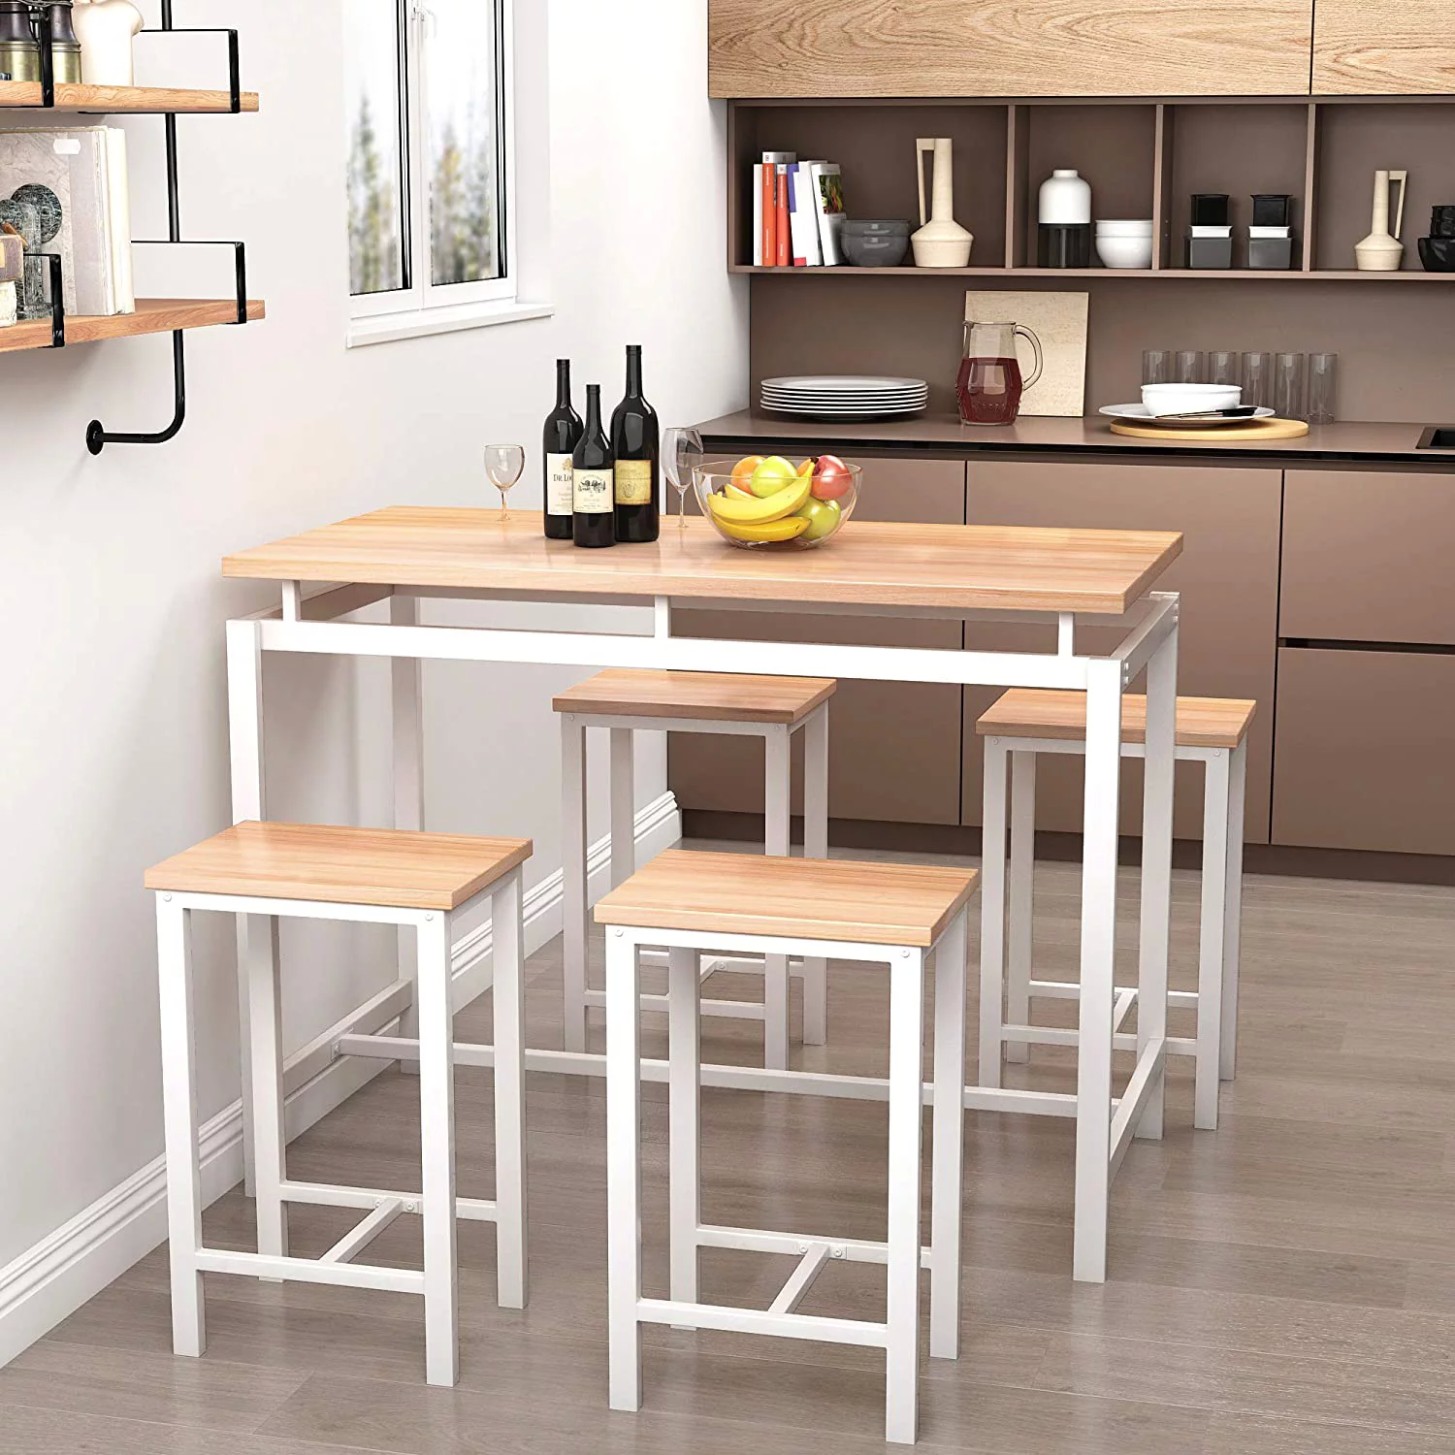 DKLGG 8-Piece Dining Table Set Modern Small Kitchen Table Set with 8 Stools  38 inches Height Beige - modern kitchen counter set